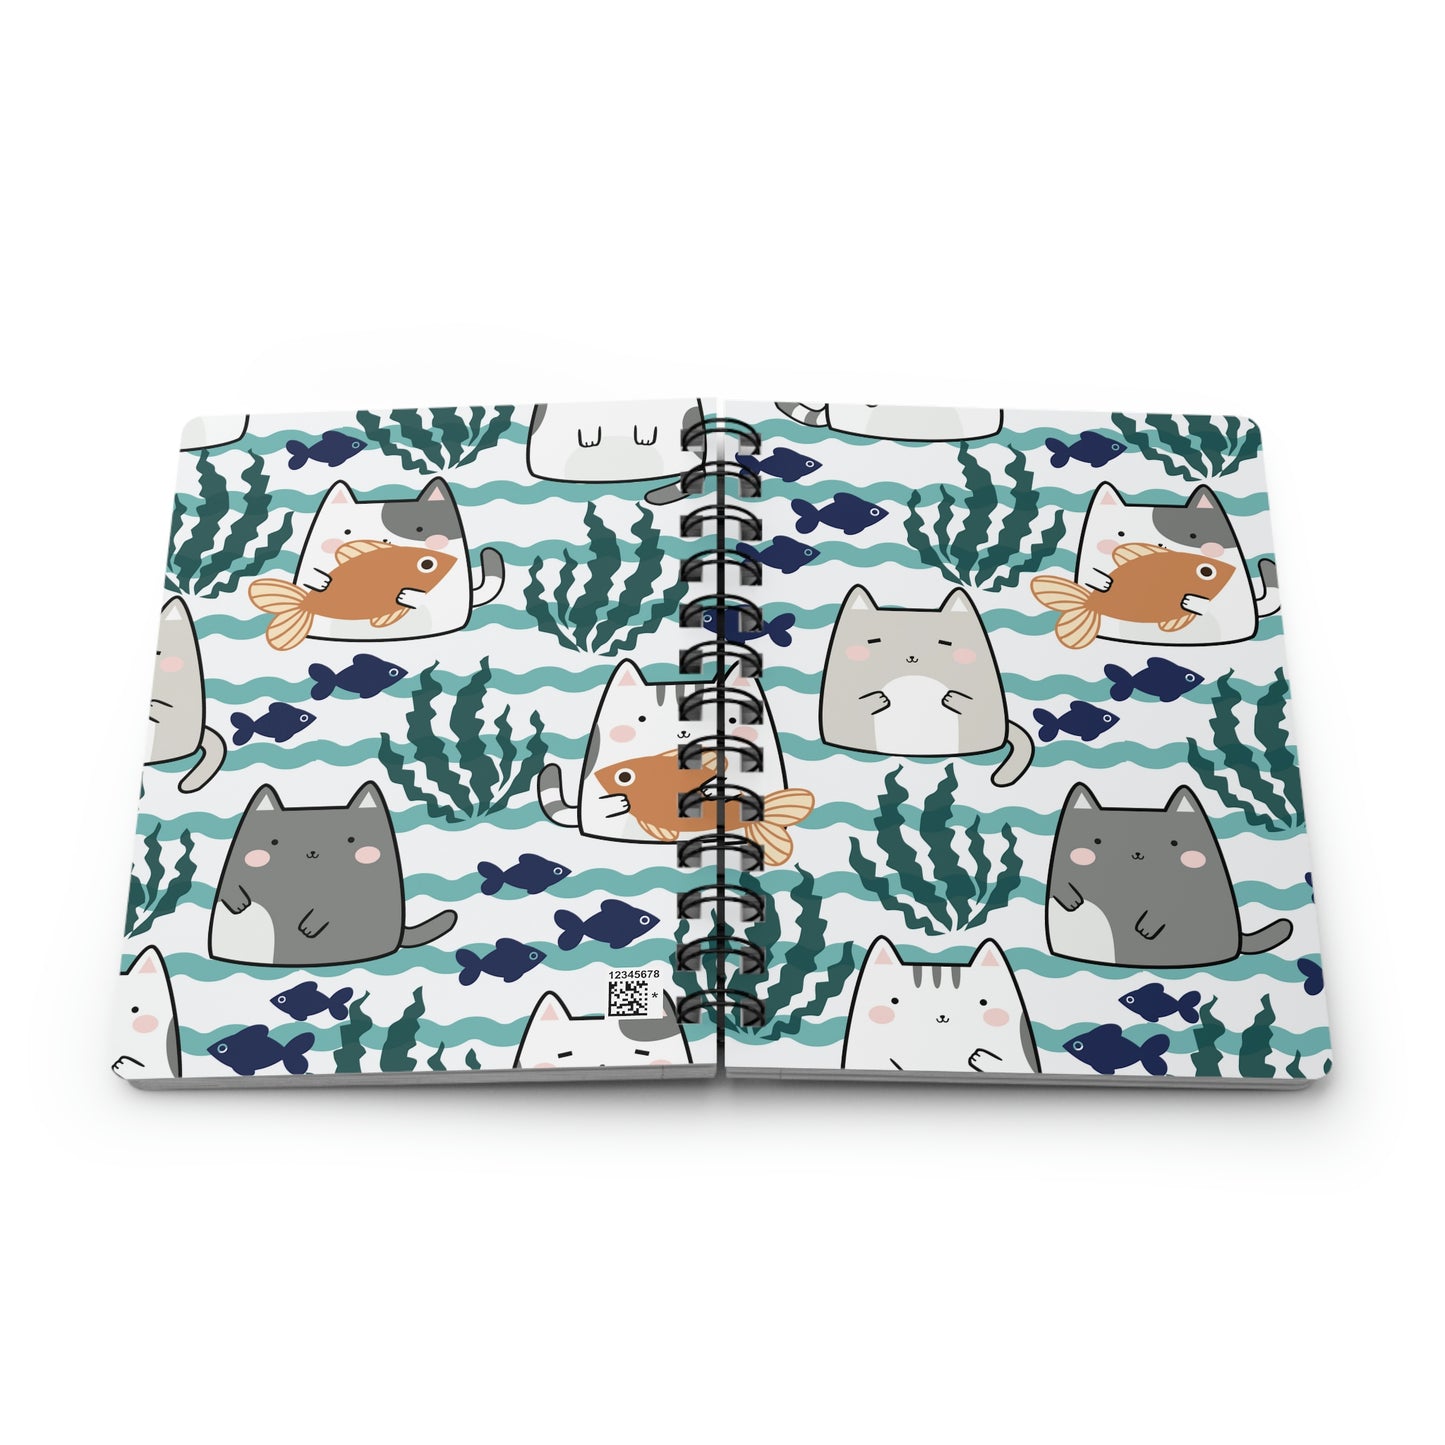 Kawaii Cats and Fishes Spiral Bound Journal